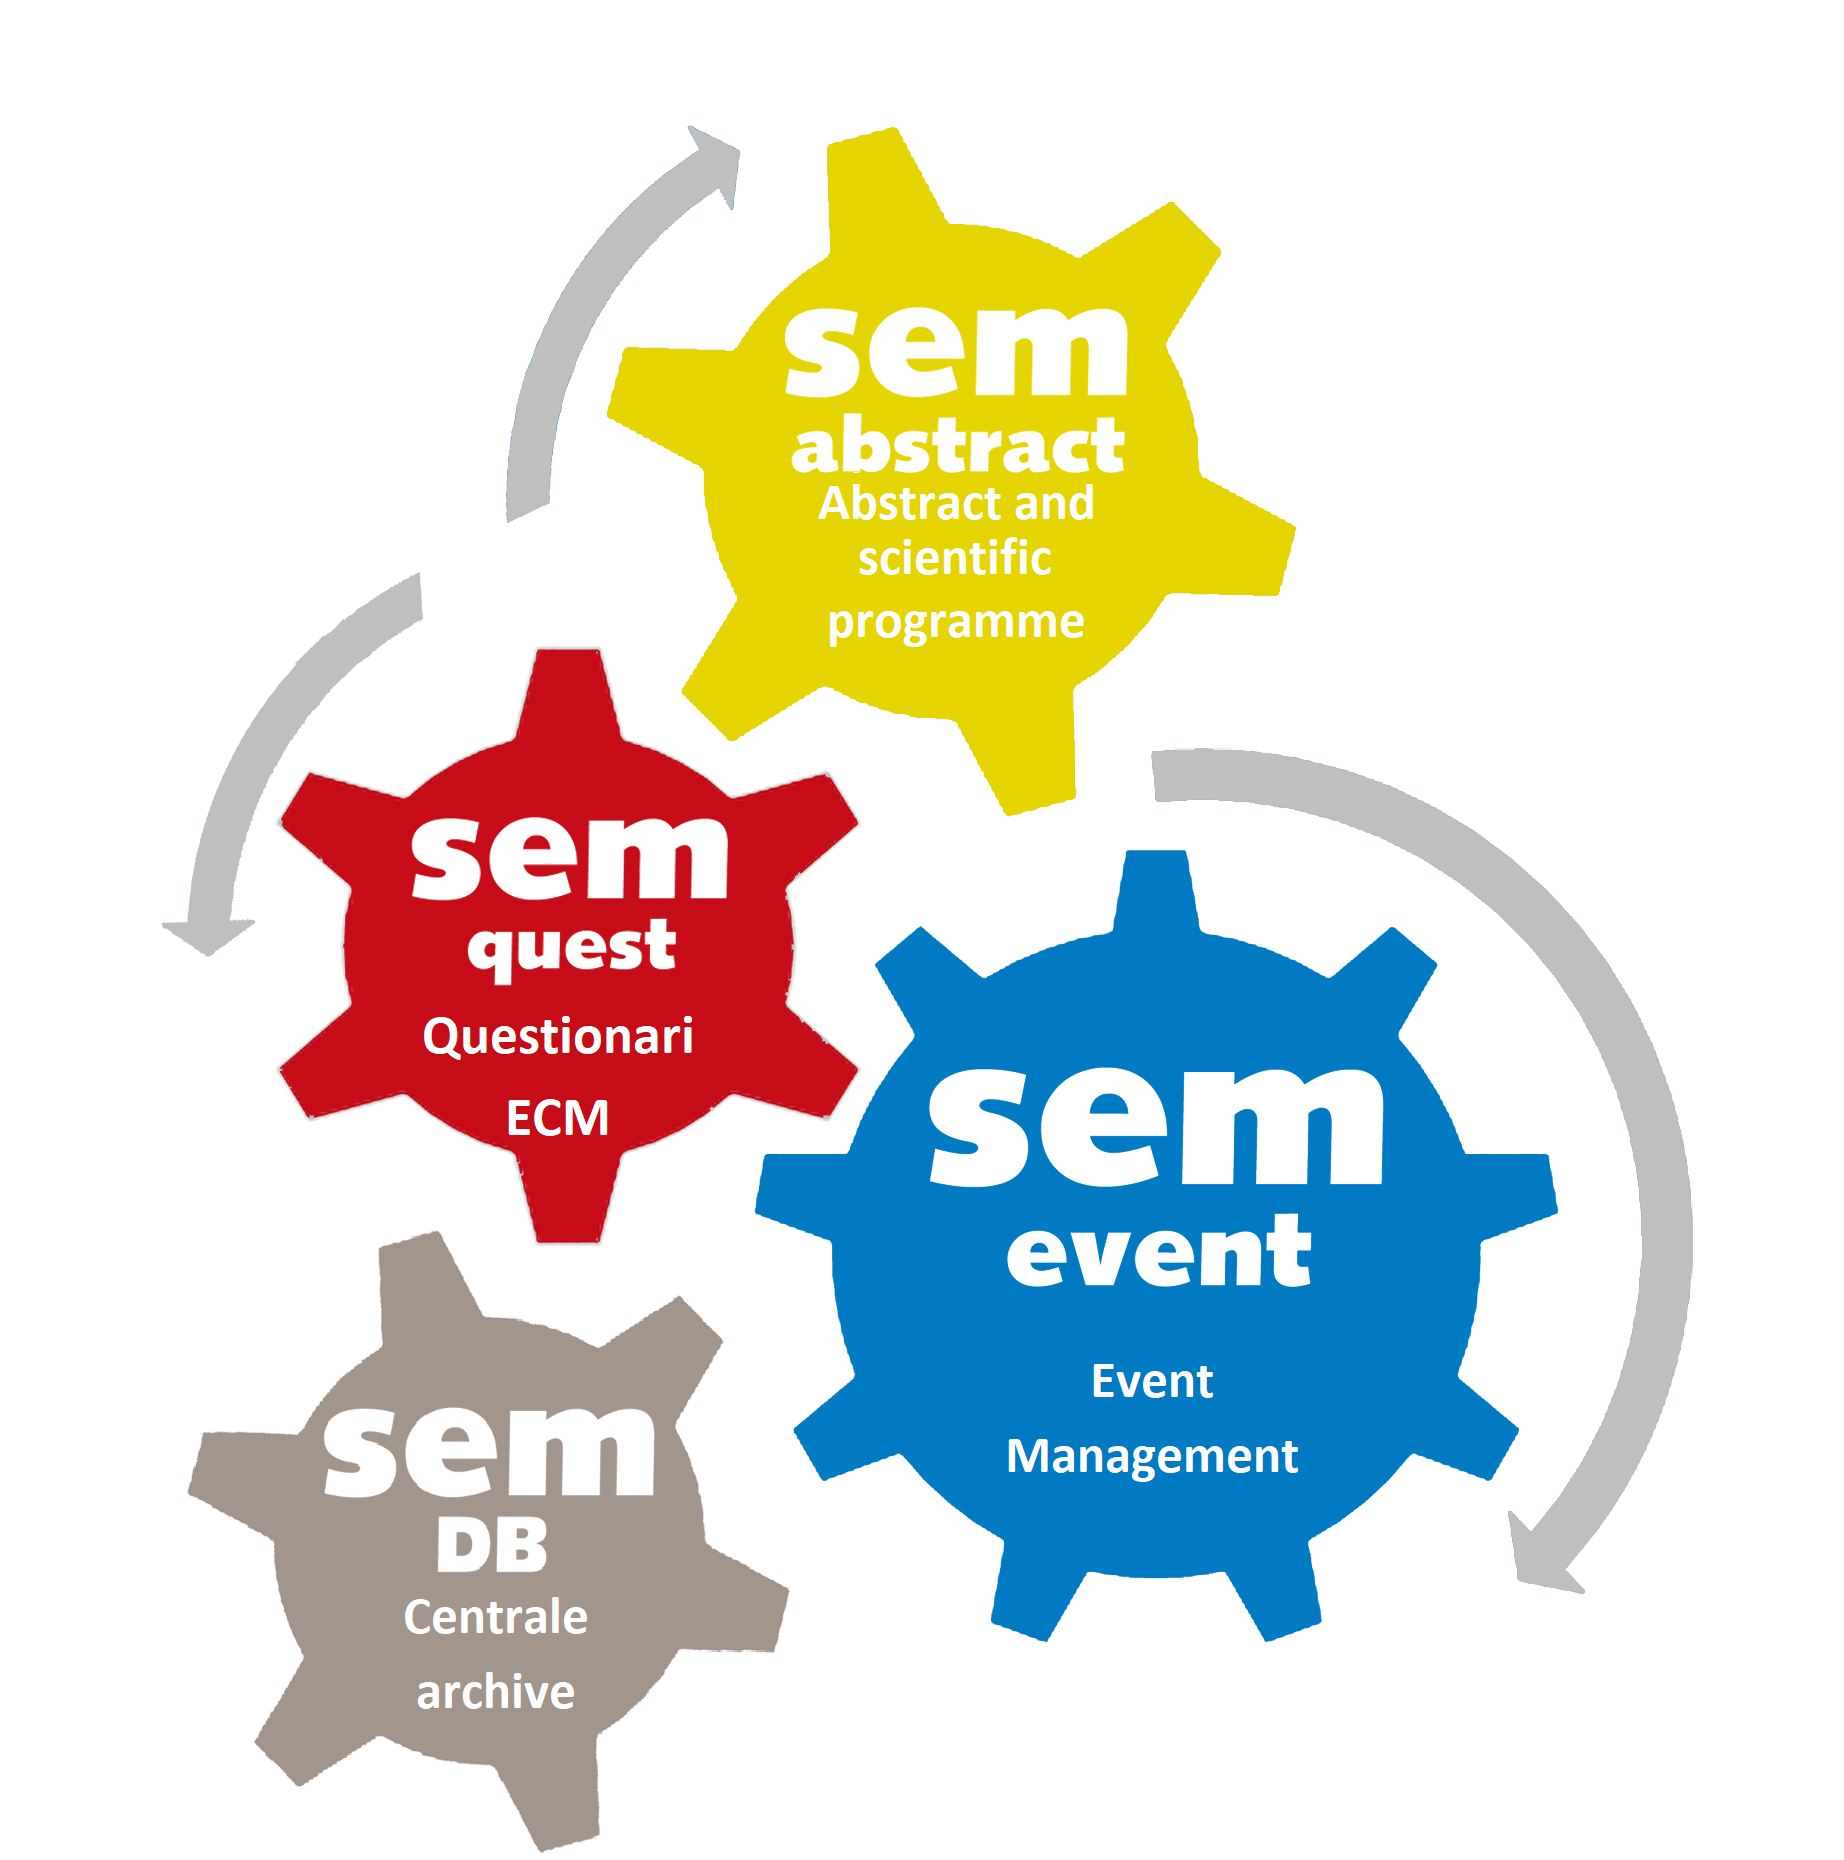 Sem Abstract, it solutions